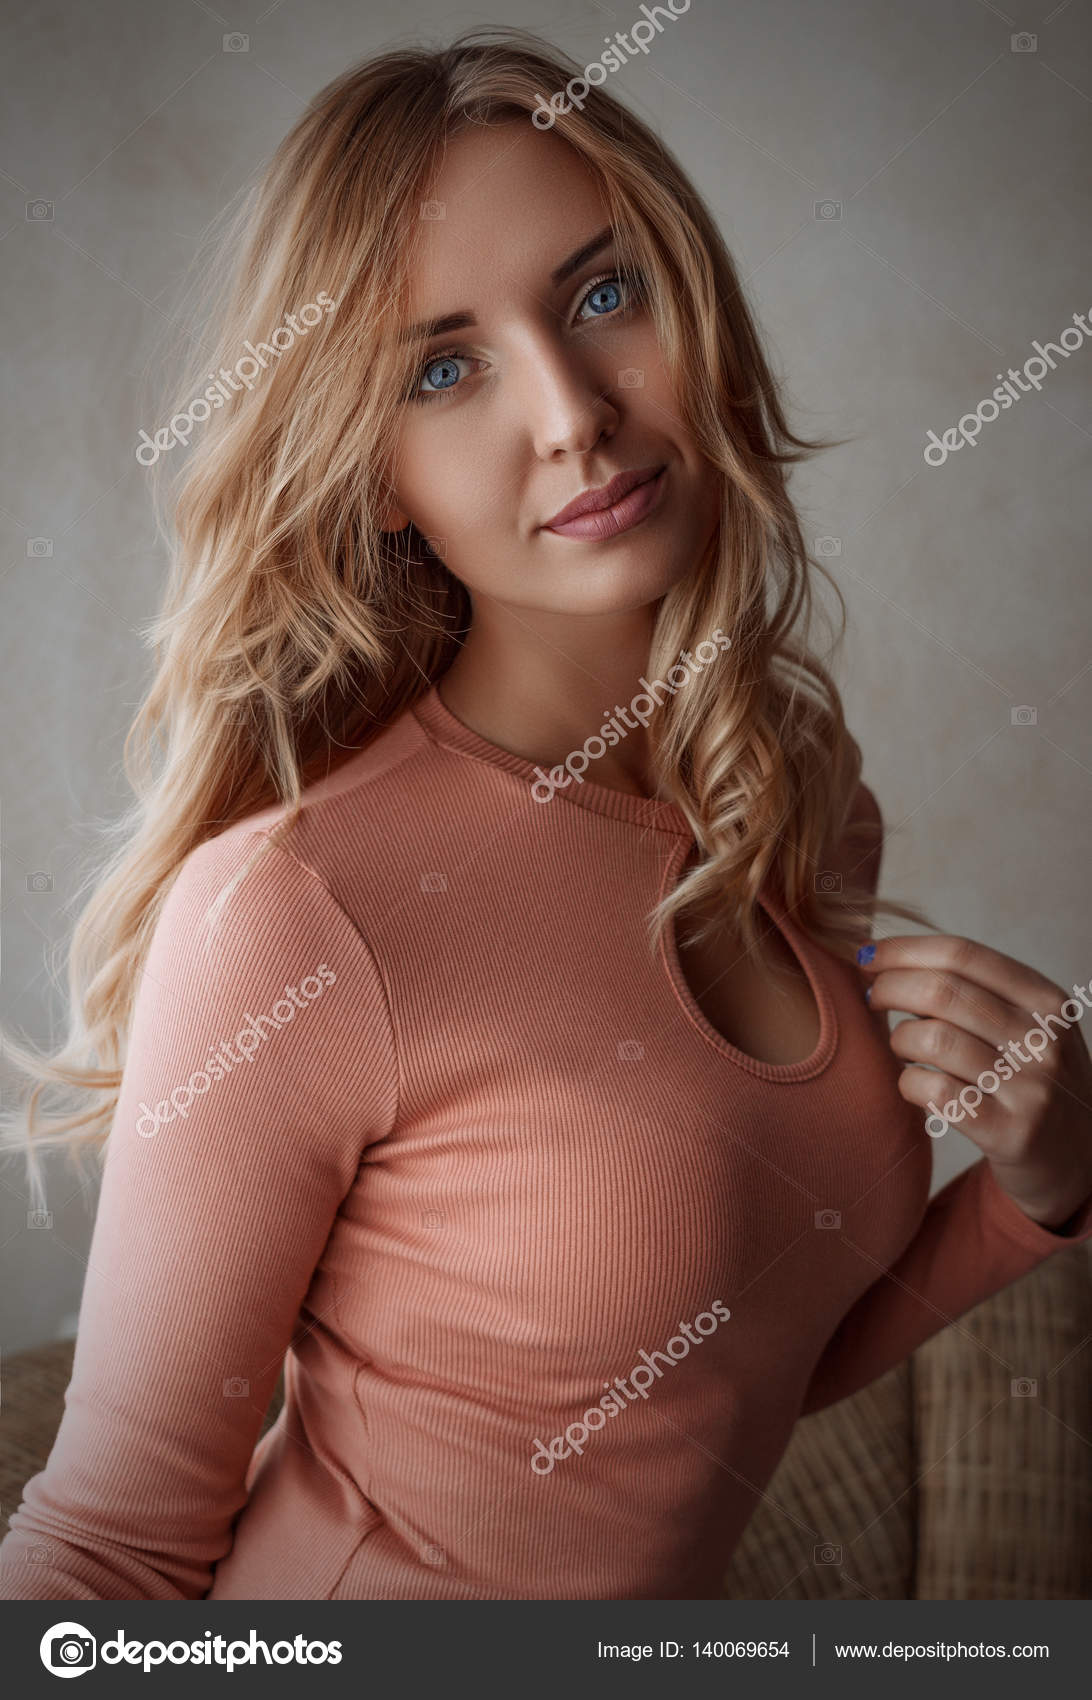 Classic Close Up Portrait Of Curly Cute Girl With Beauty Blonde